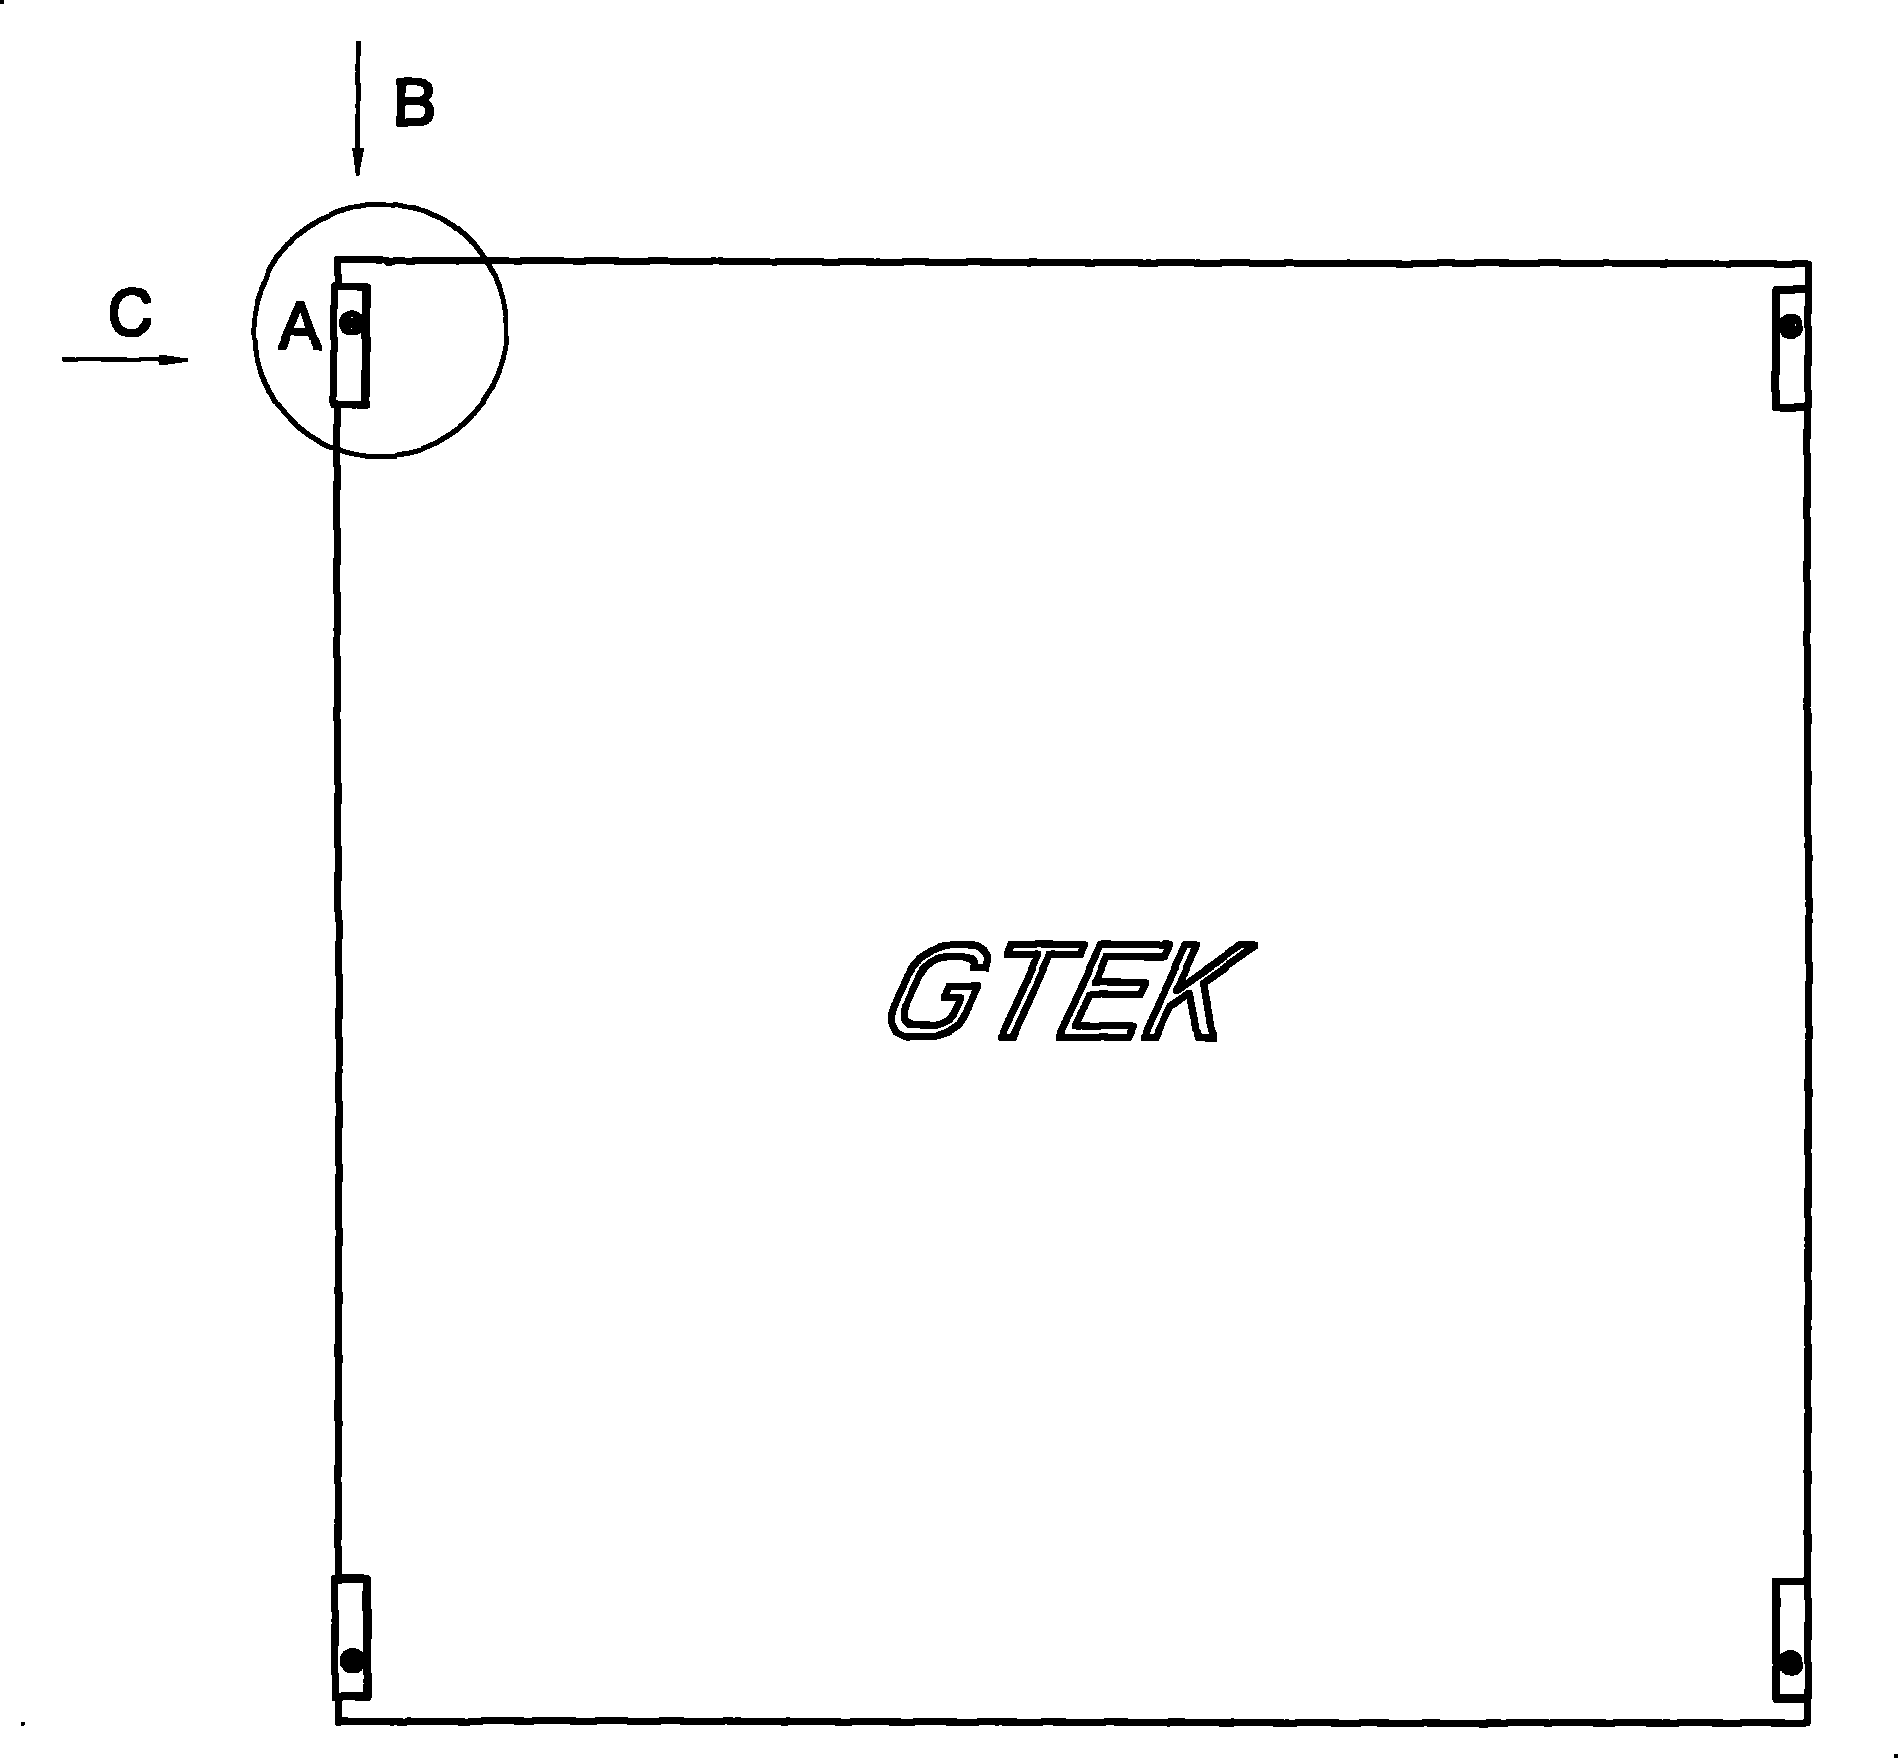 Splicing structure of combined screen